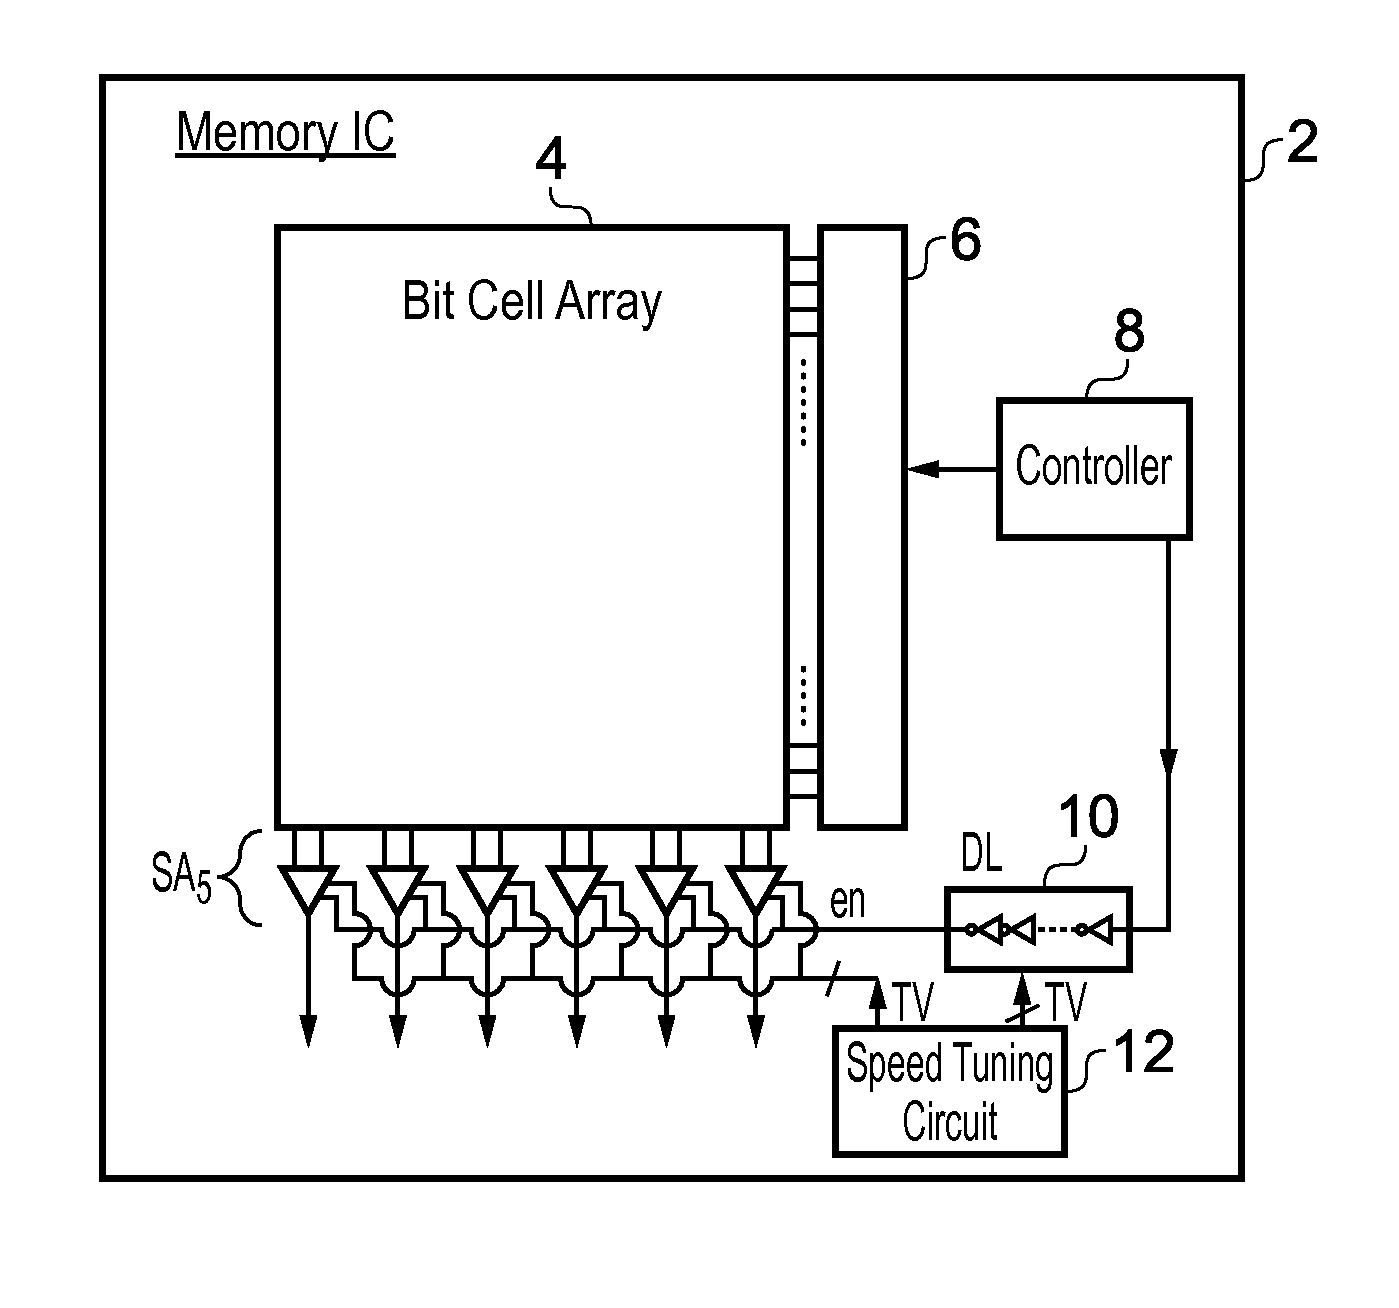 Post fabrication tuning of an integrated circuit